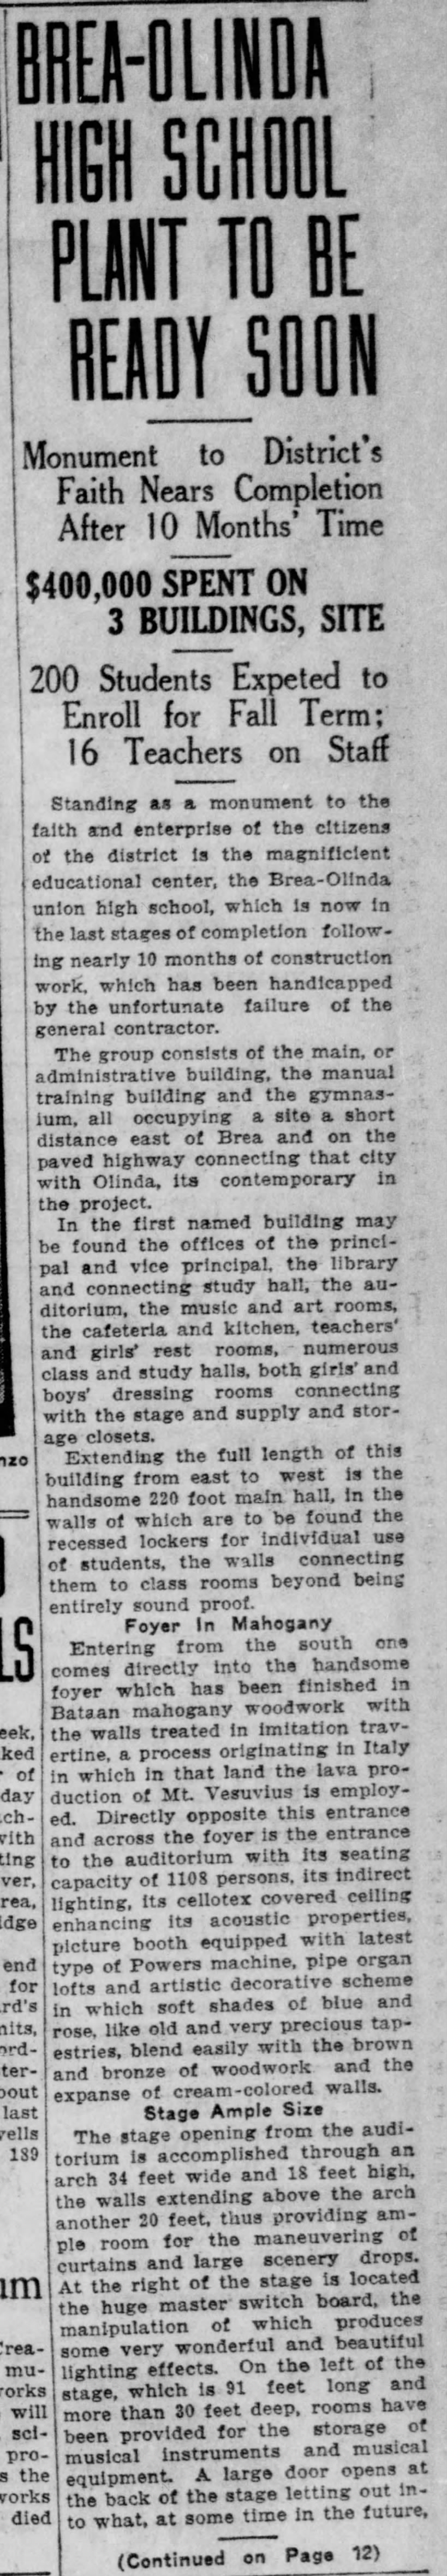 An article about the construction of Brea Olinda High School.